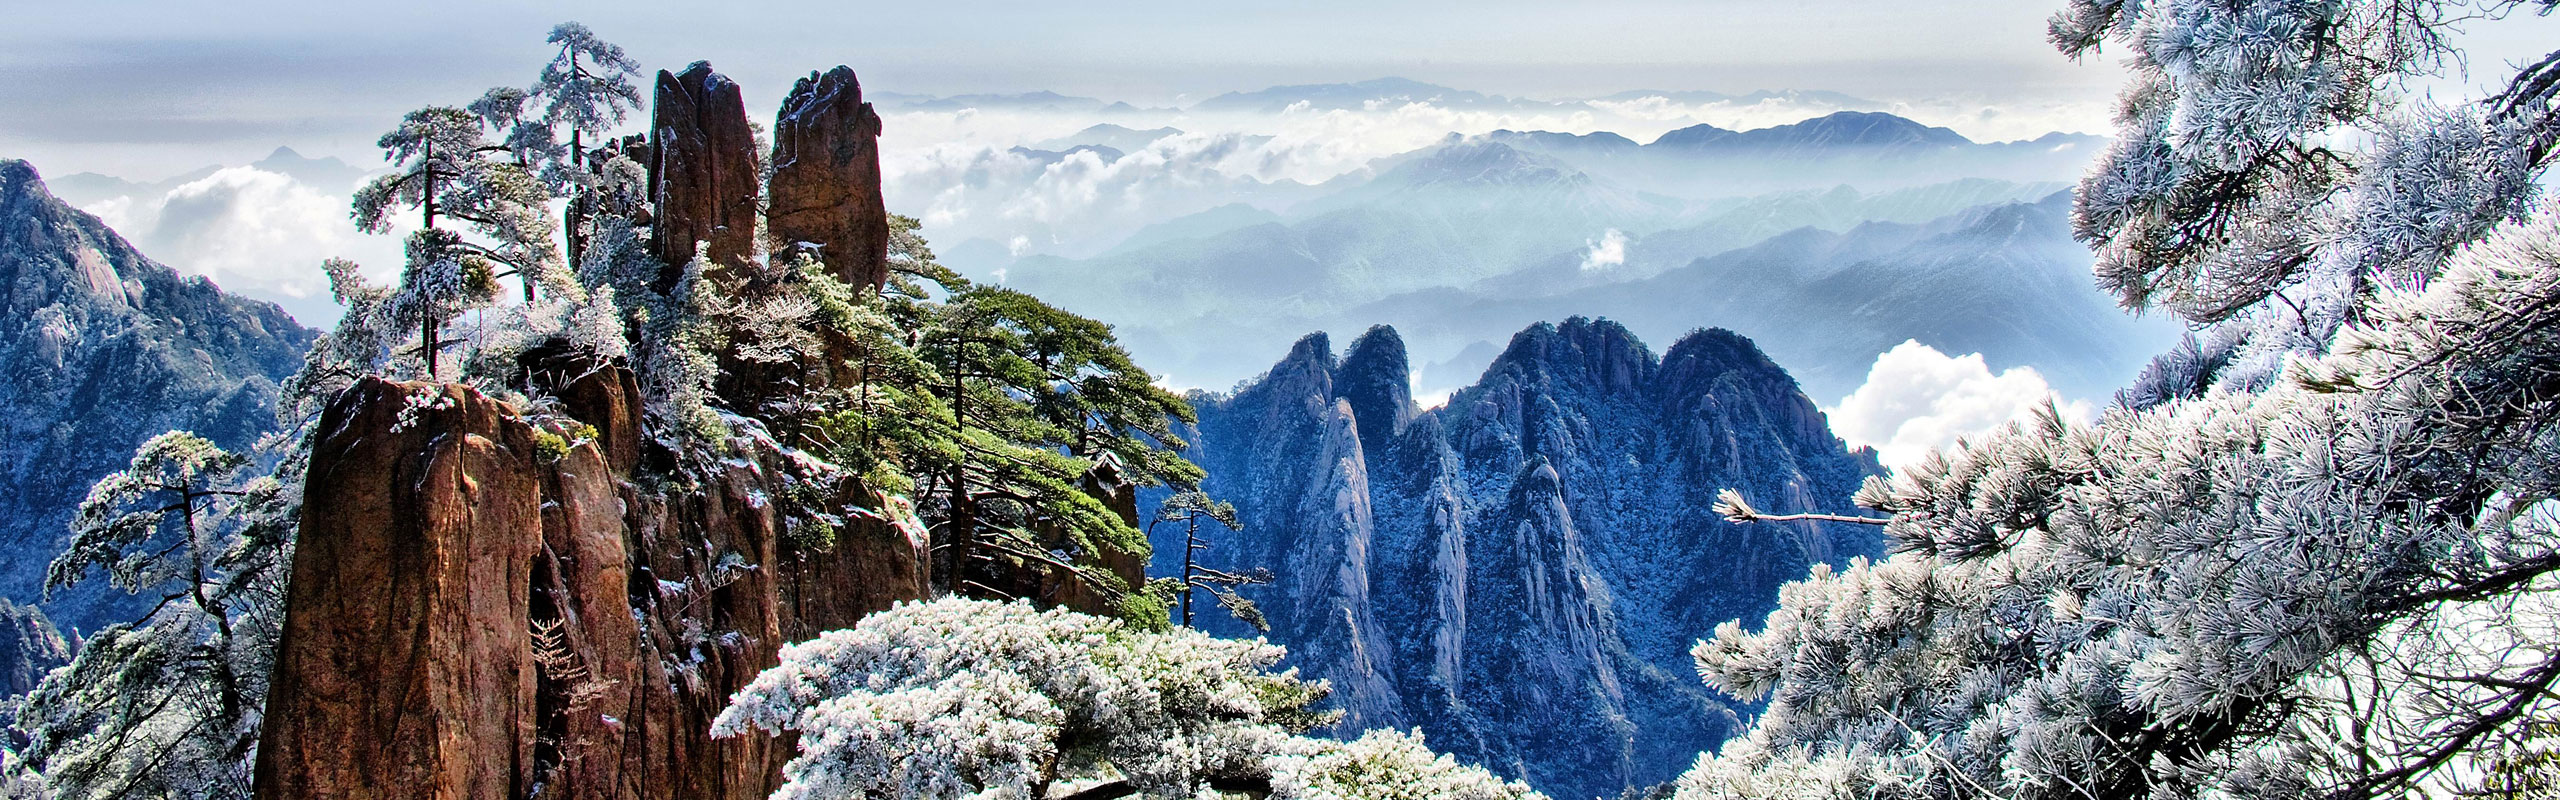 2-Day Essential Huangshan Weekend Tour